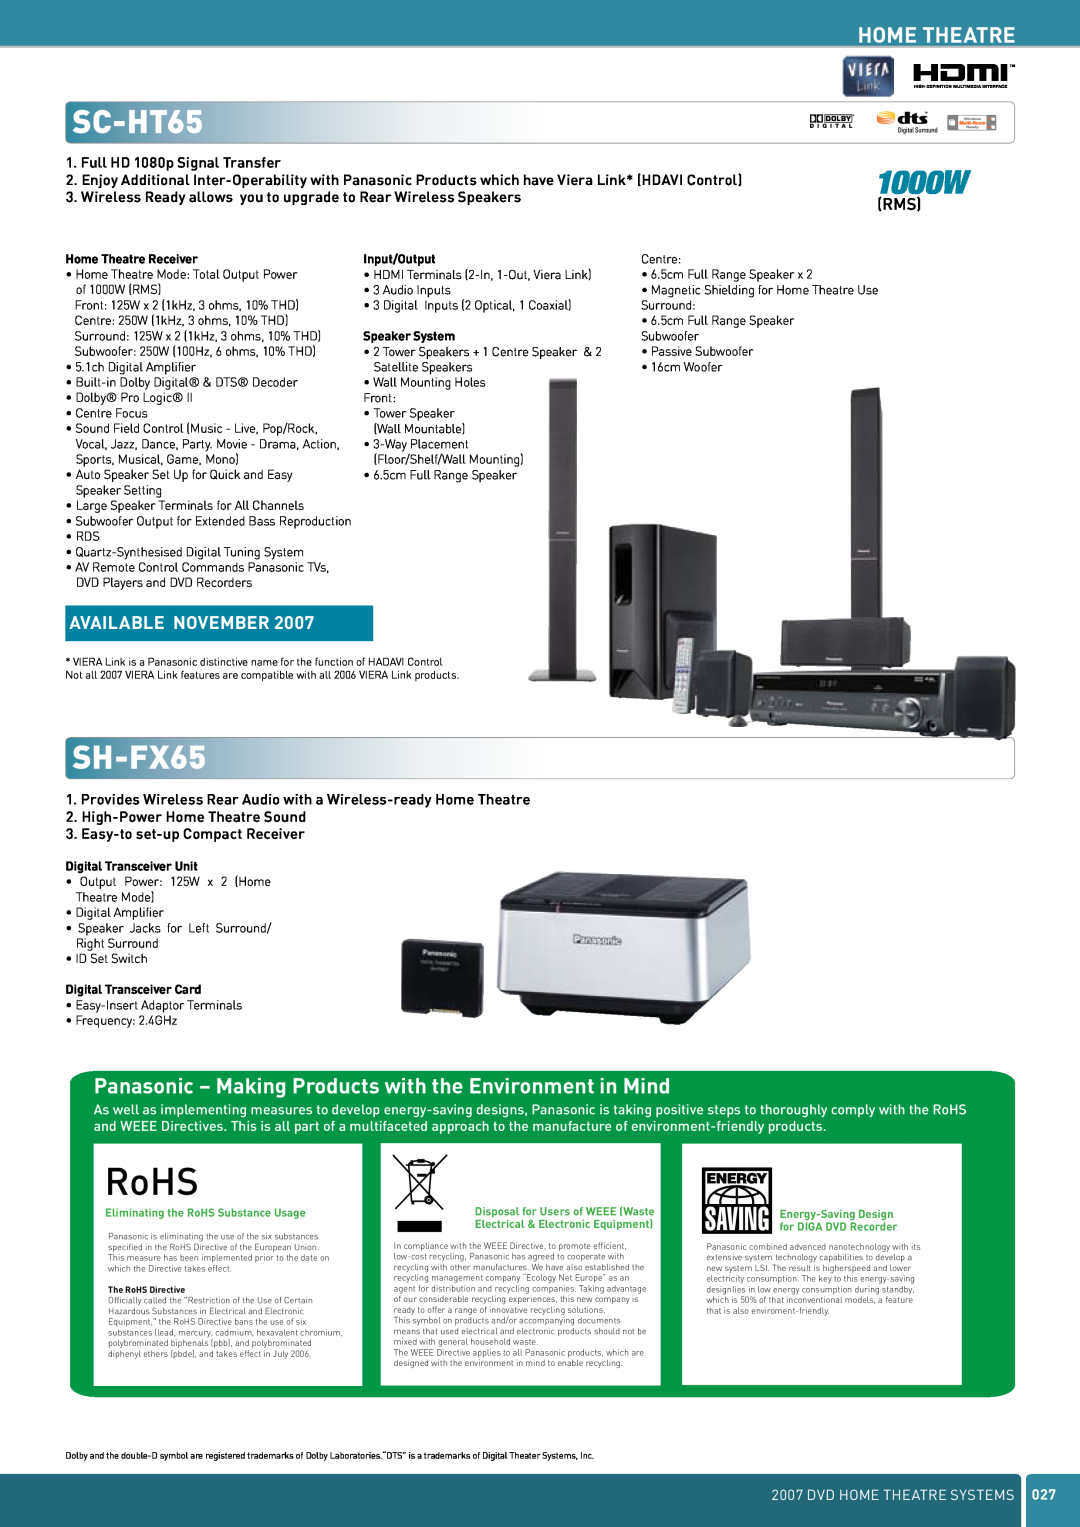 Panasonic DVD Home Theatre System SC-HT65, SH-FX65, Panasonic - Making Products with the Environment in Mind, RoHS, 1000W 